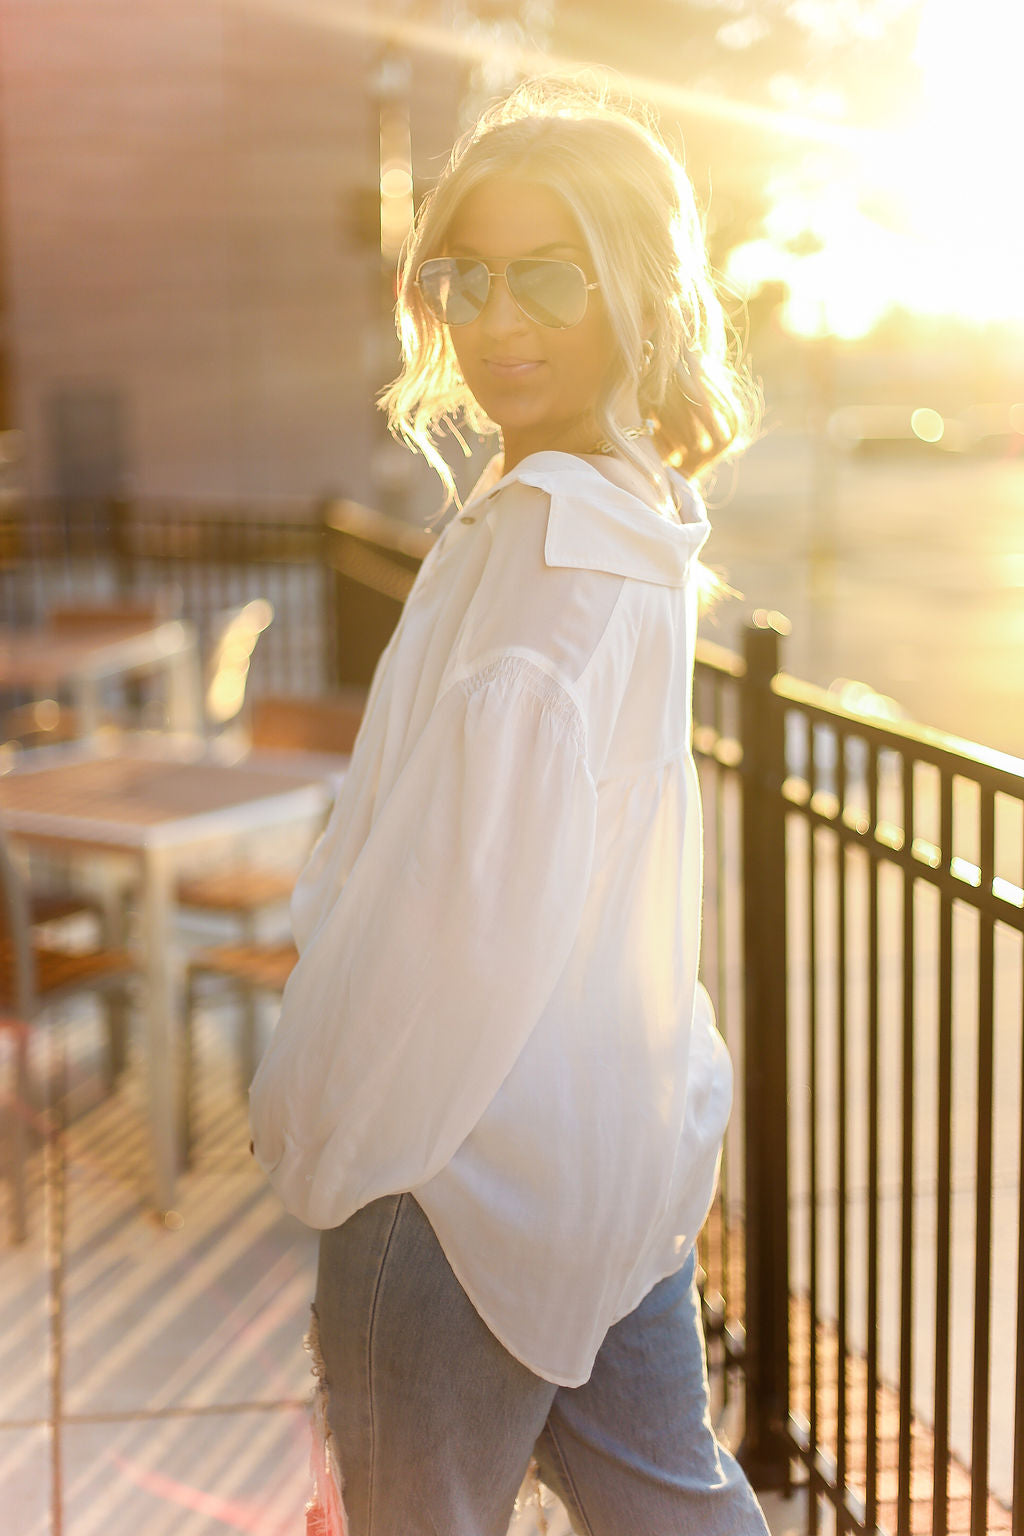 White Long Sleeve Button Down Top